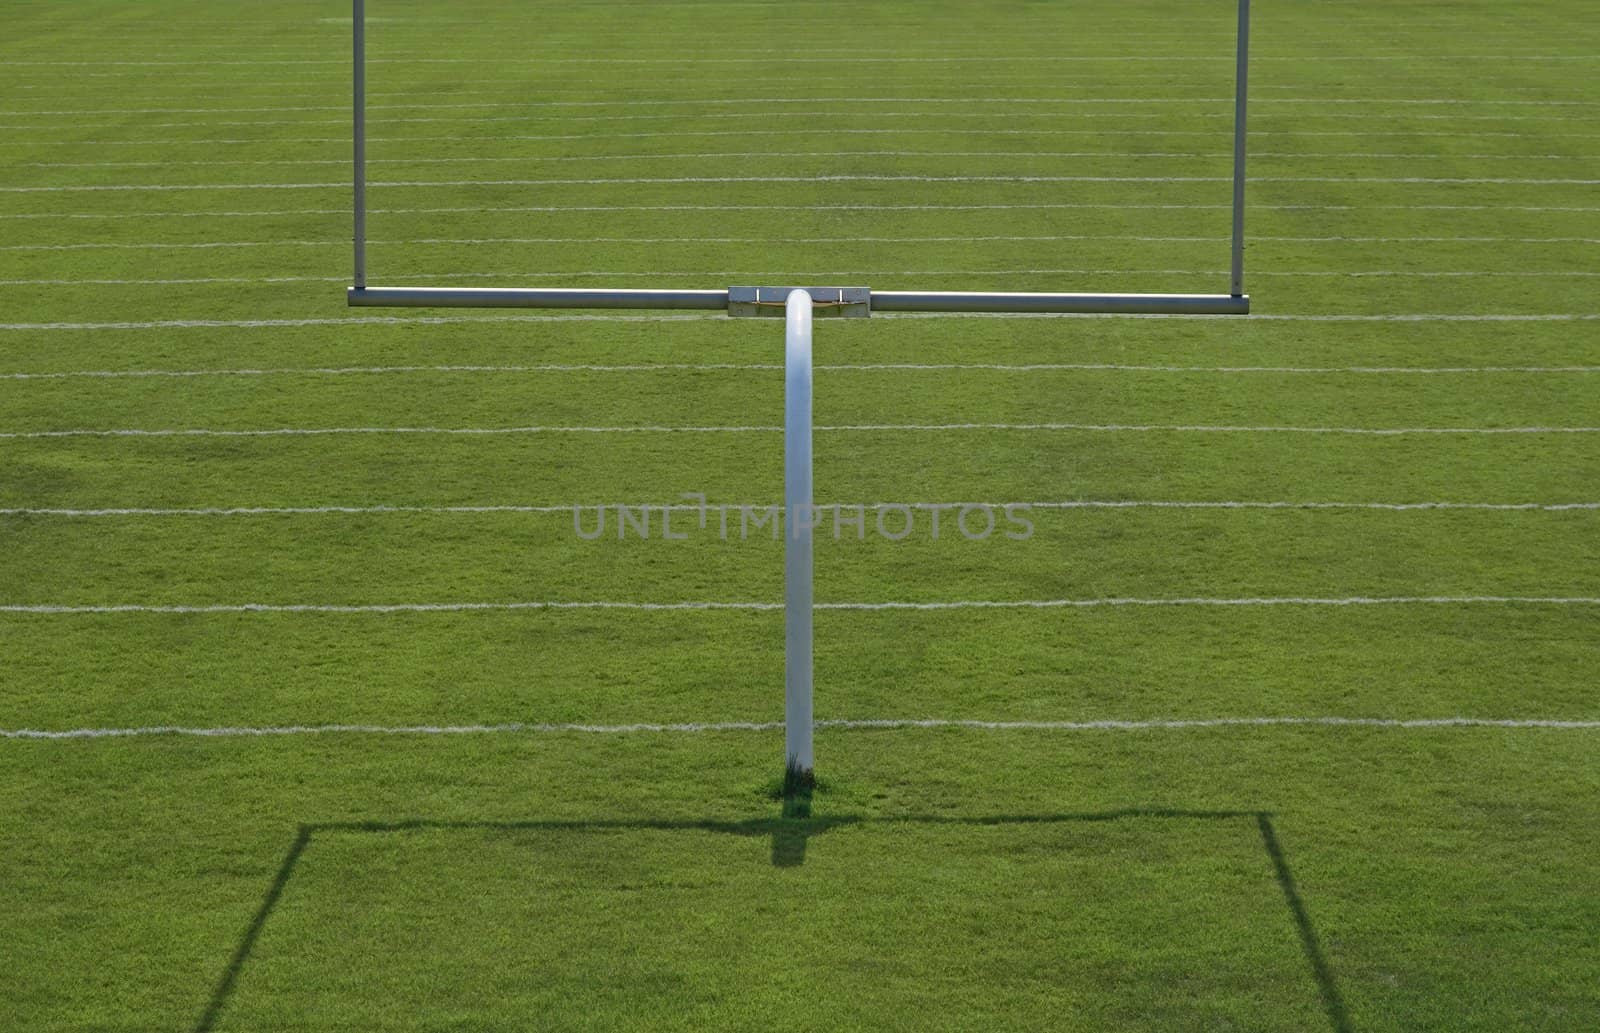 American football playing field with goal posts.